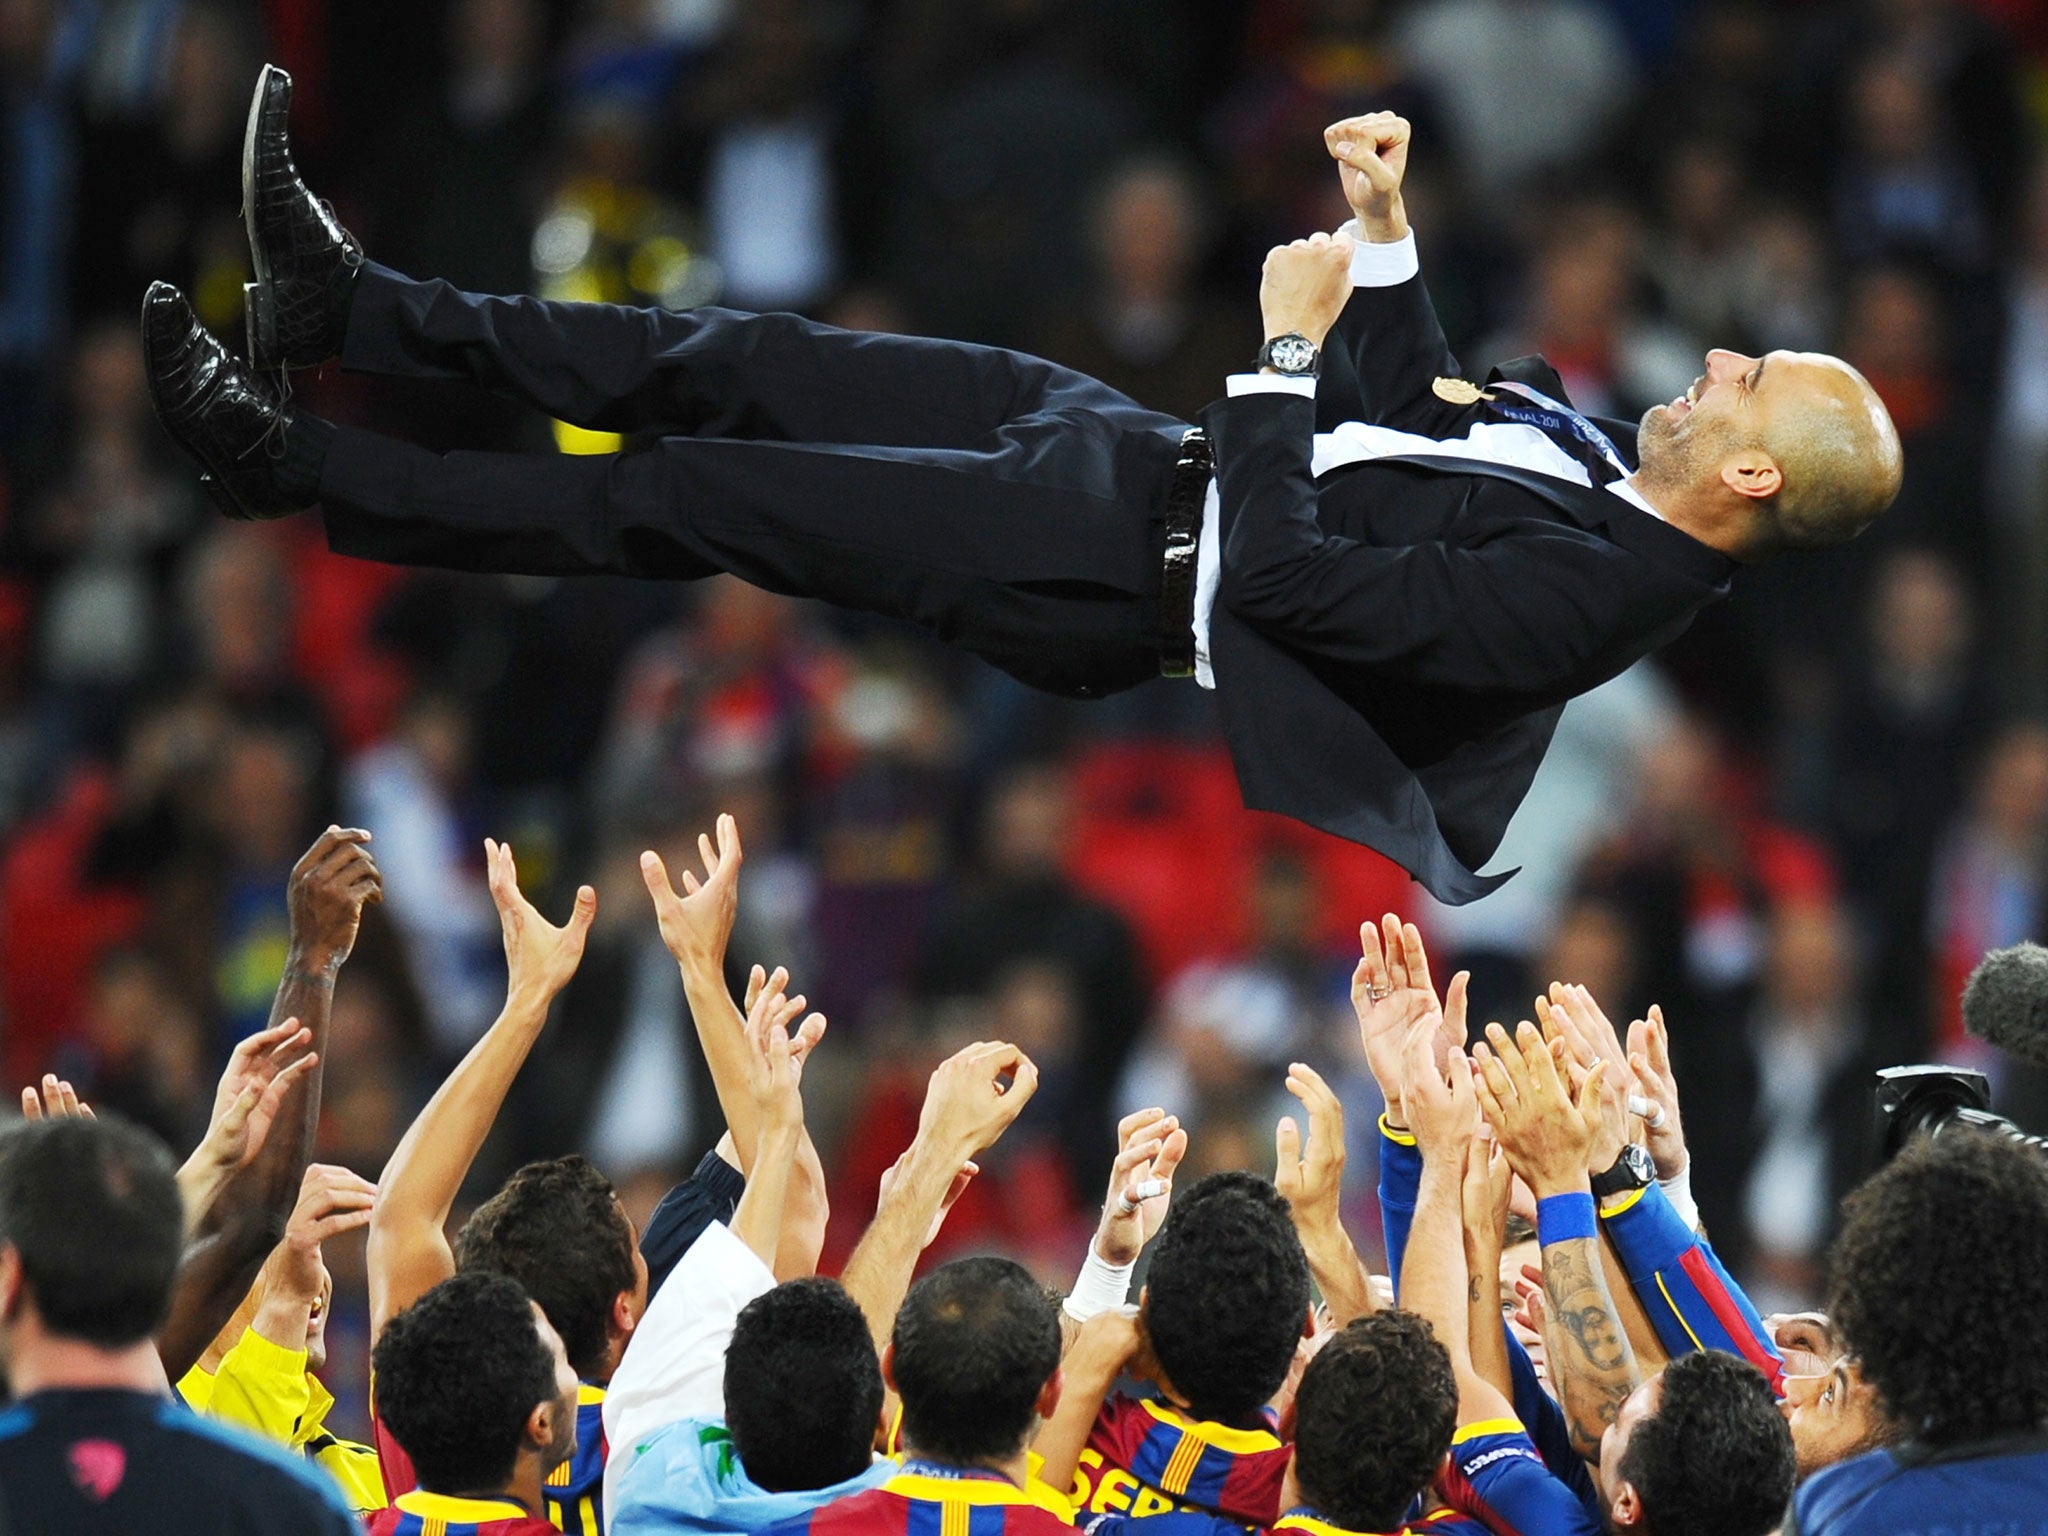 Pep Guardiola and Barcelona celebrate winning the Champions League in 2011